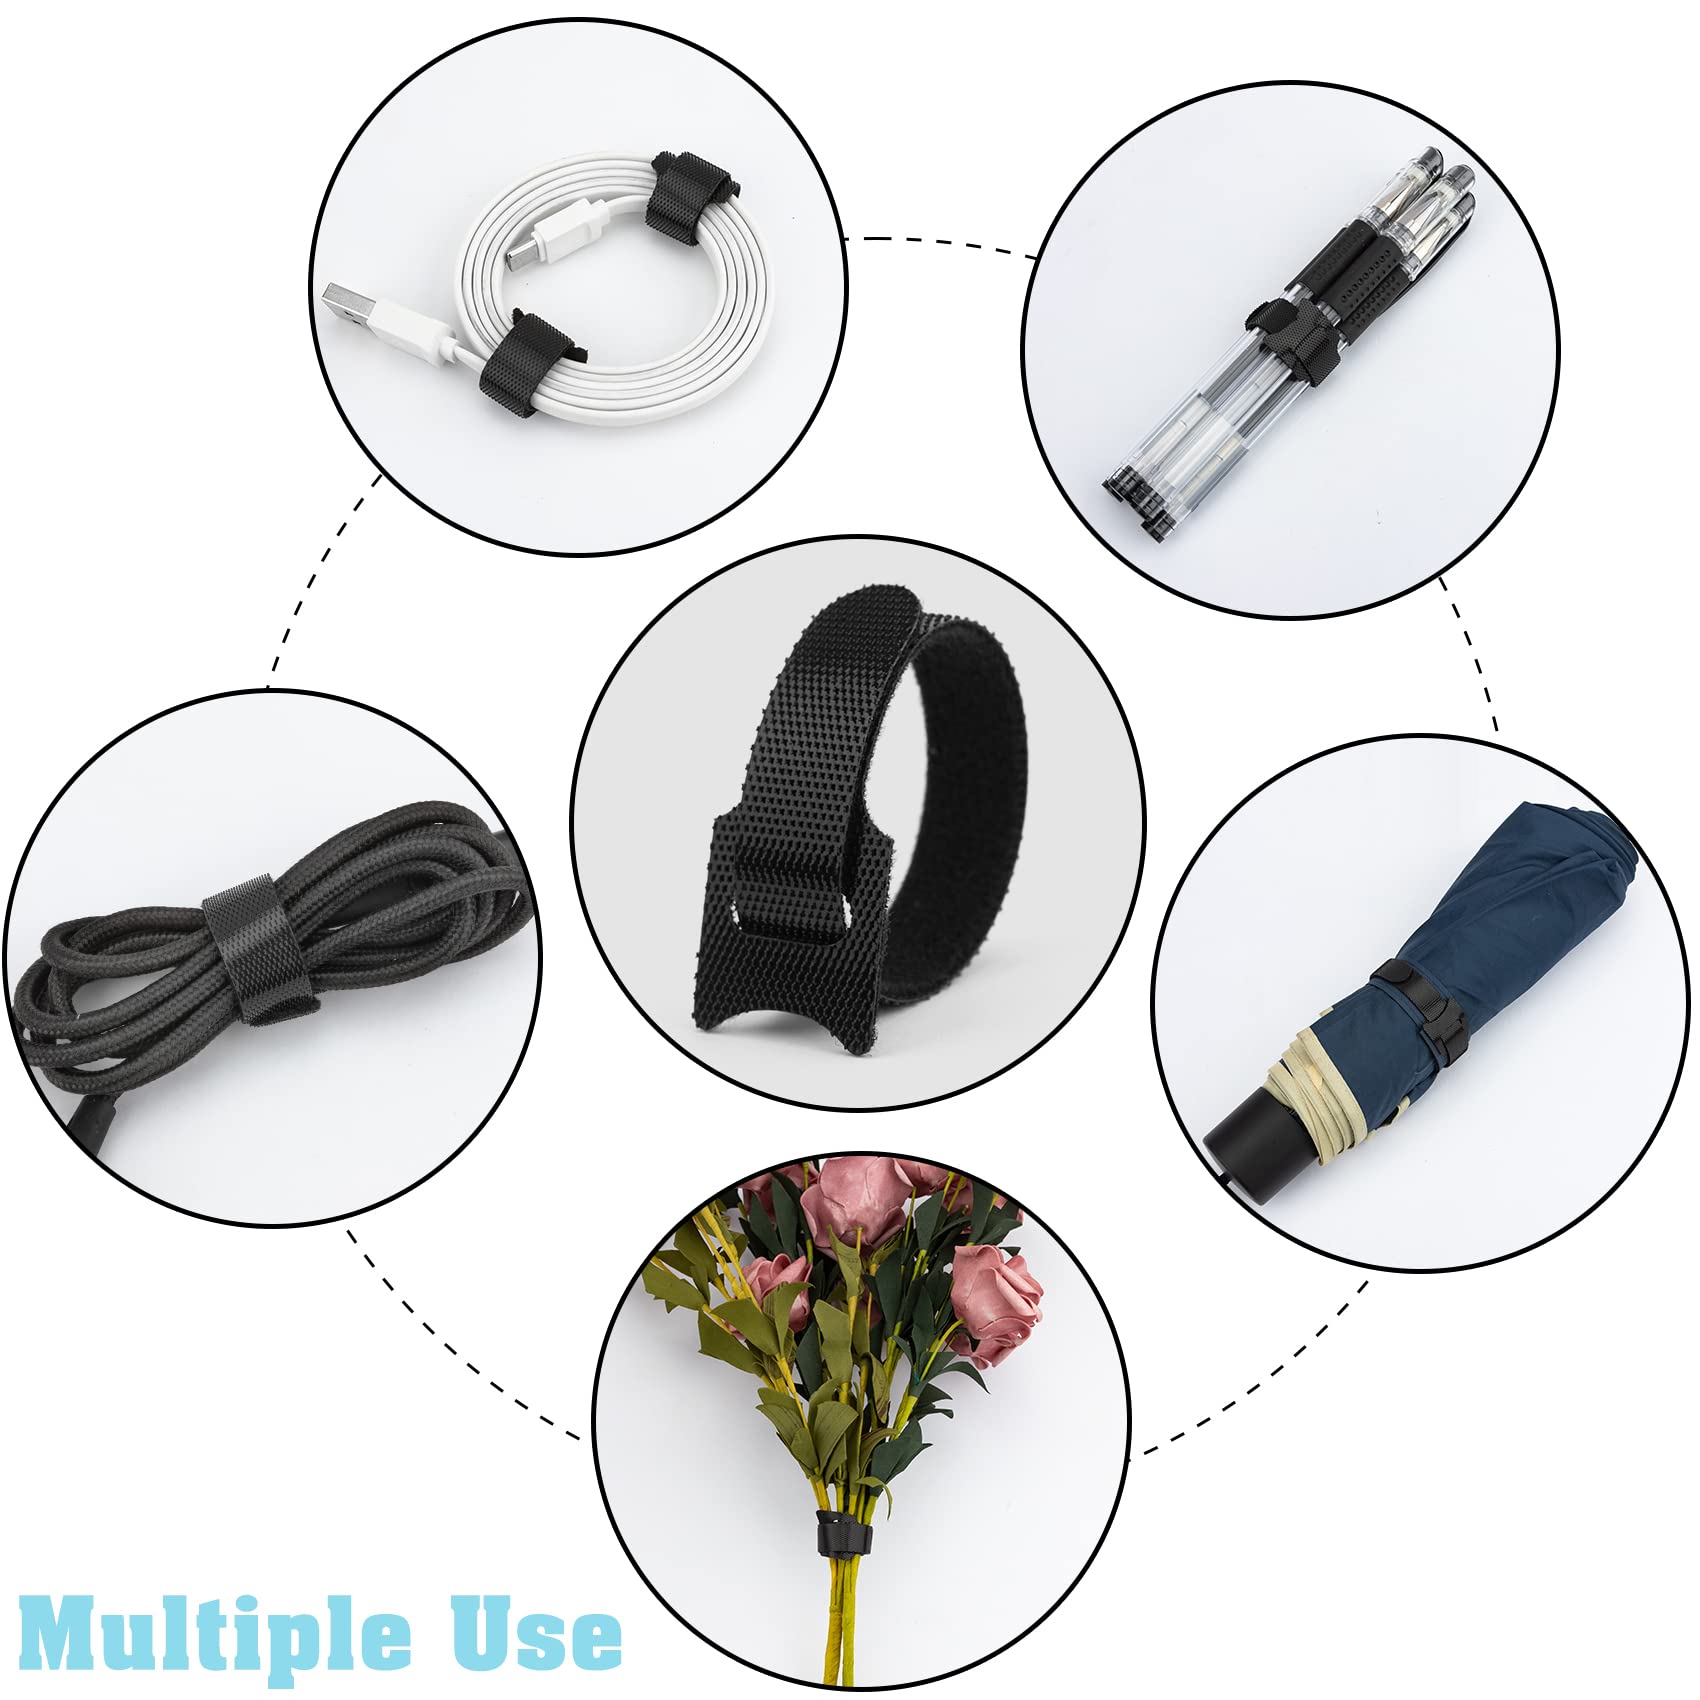 Reusable Cable Ties 120PCS Adjustable 6 Inch Cord Ties Fastening Wire Straps Cable Organizer Wire Ties Cable Management Hook Loop Cord Organizer for Electronics Home Office PC TV Organizing (Black)